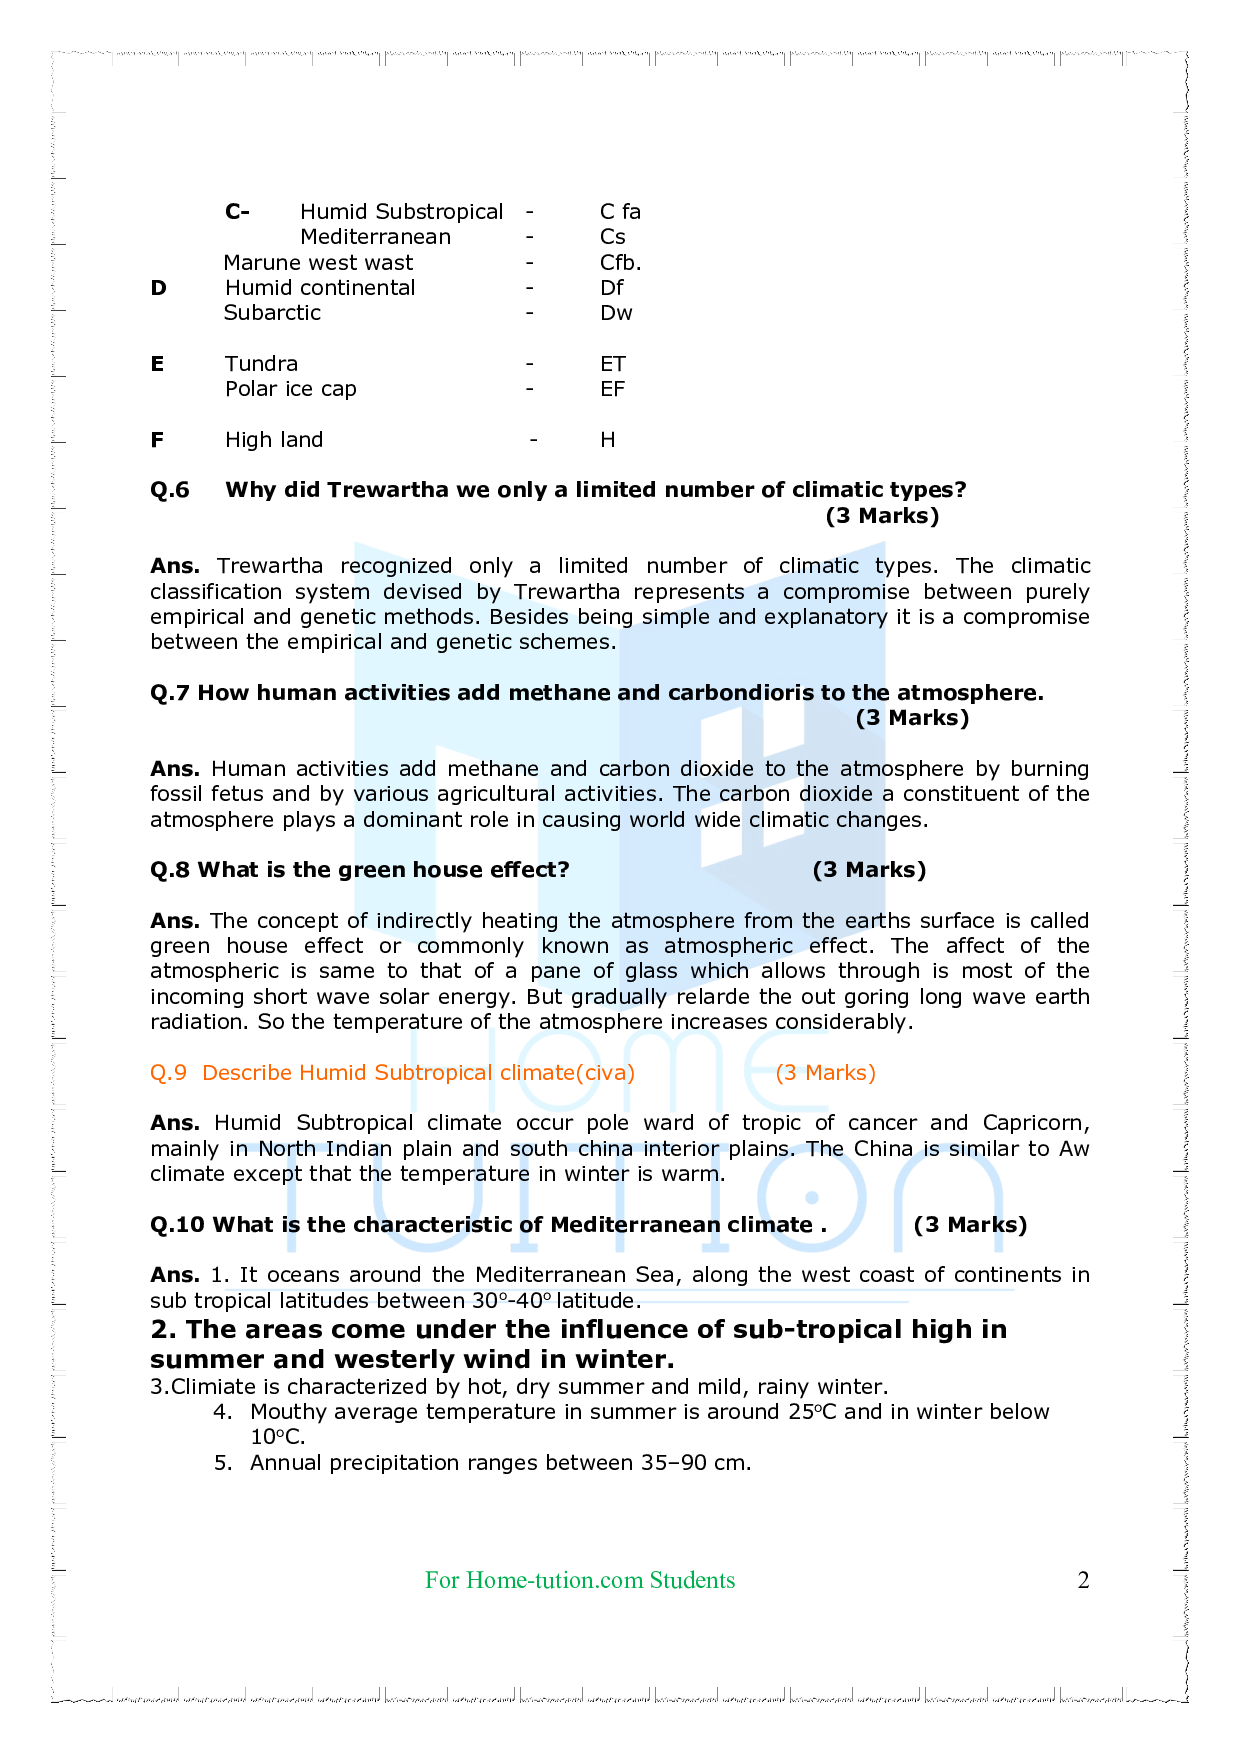 Chapter 12 World Climate and Climate Change Questions